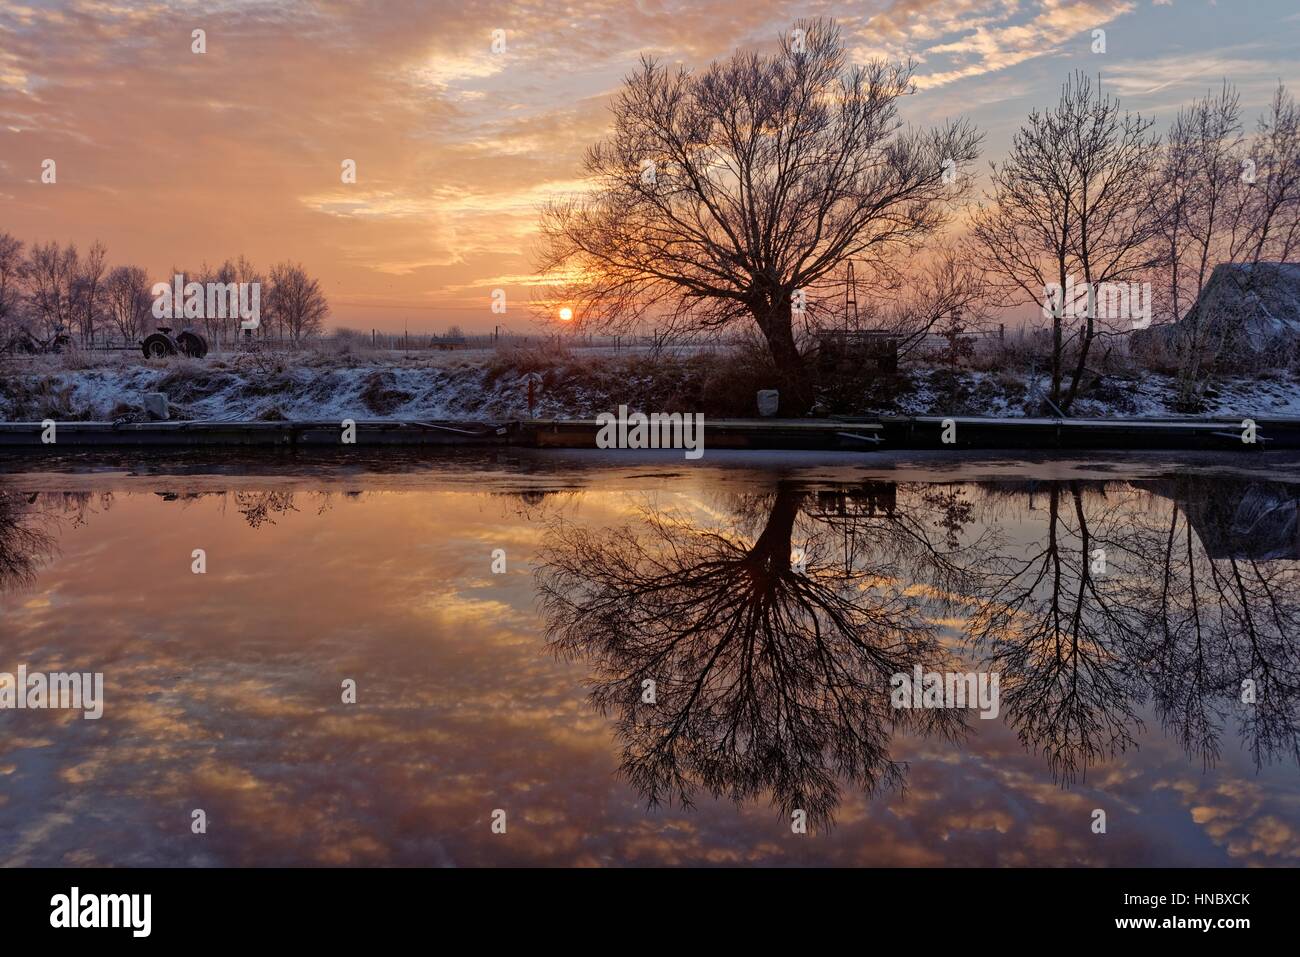 River reflections at sunset, Oldersum, Lower Saxony, Germany Stock Photo